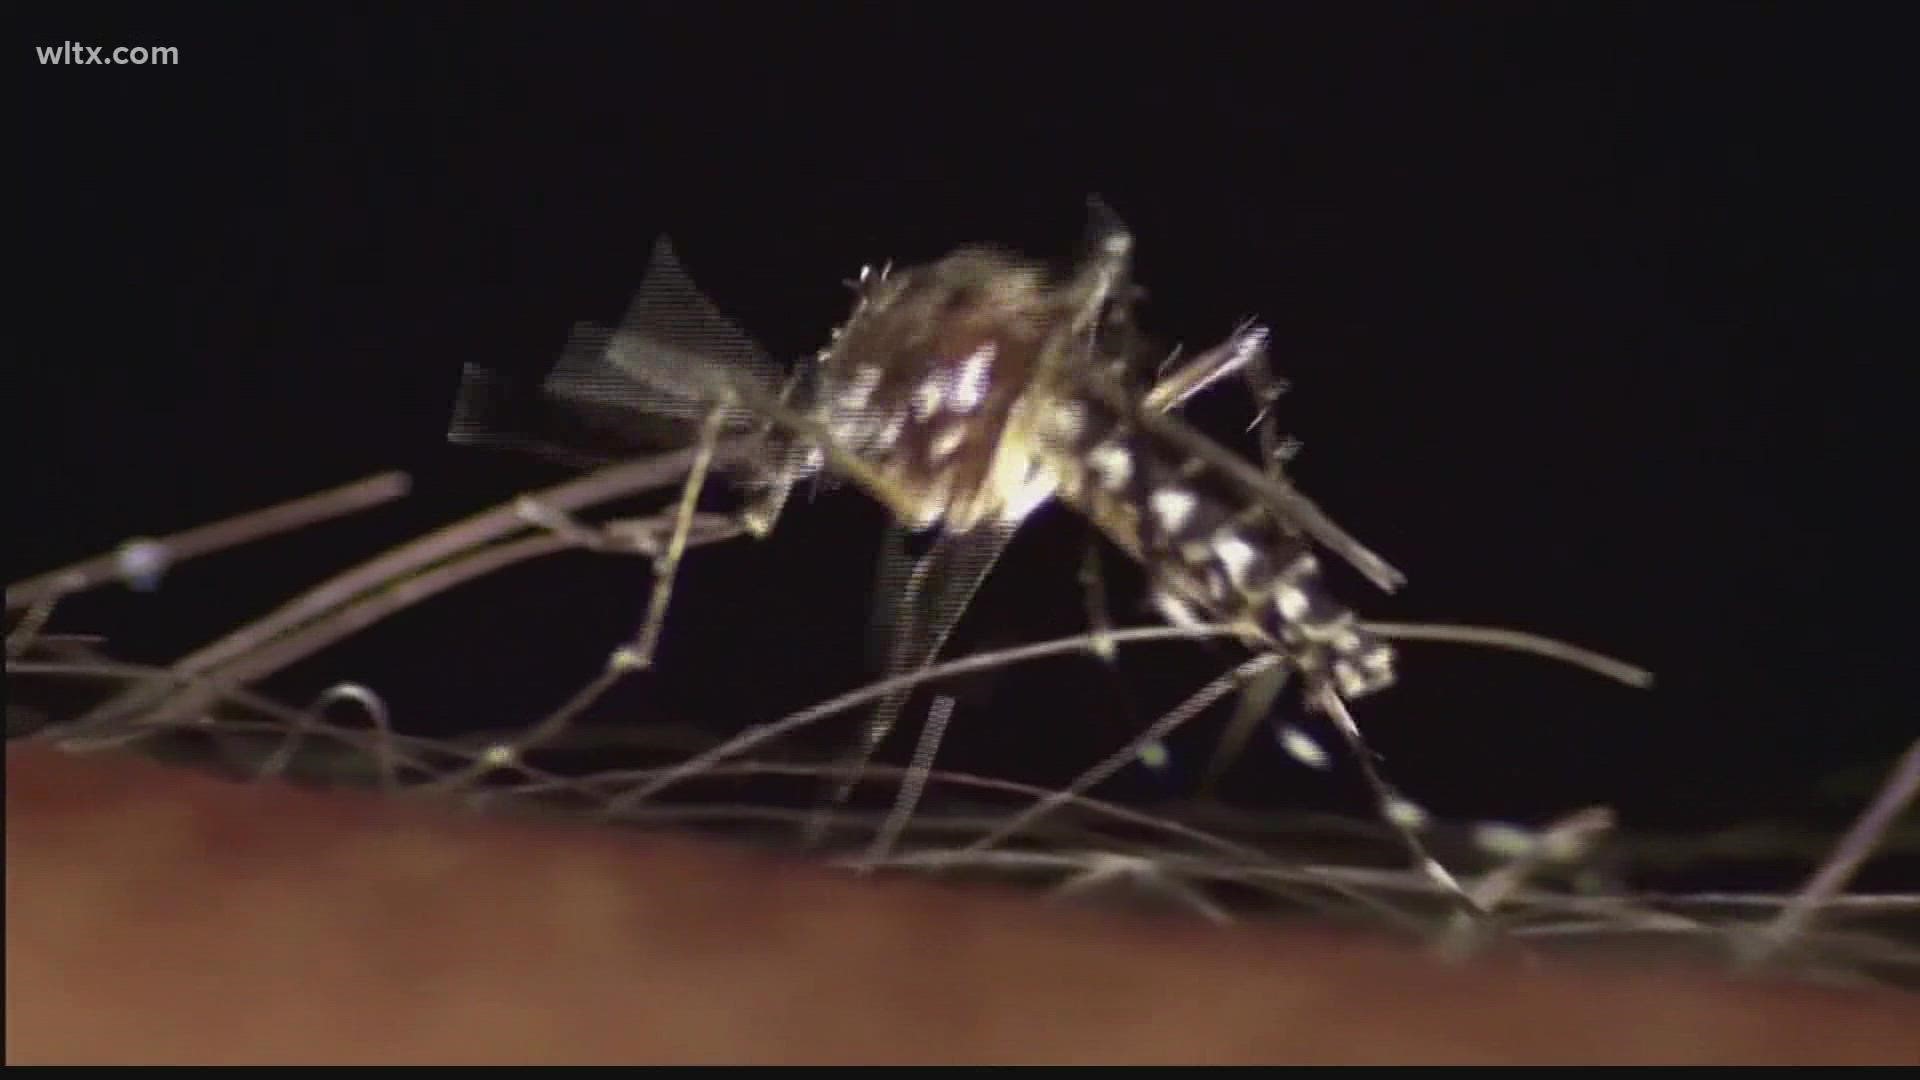 There is no vaccine or specific medicine available for West Nile virus.